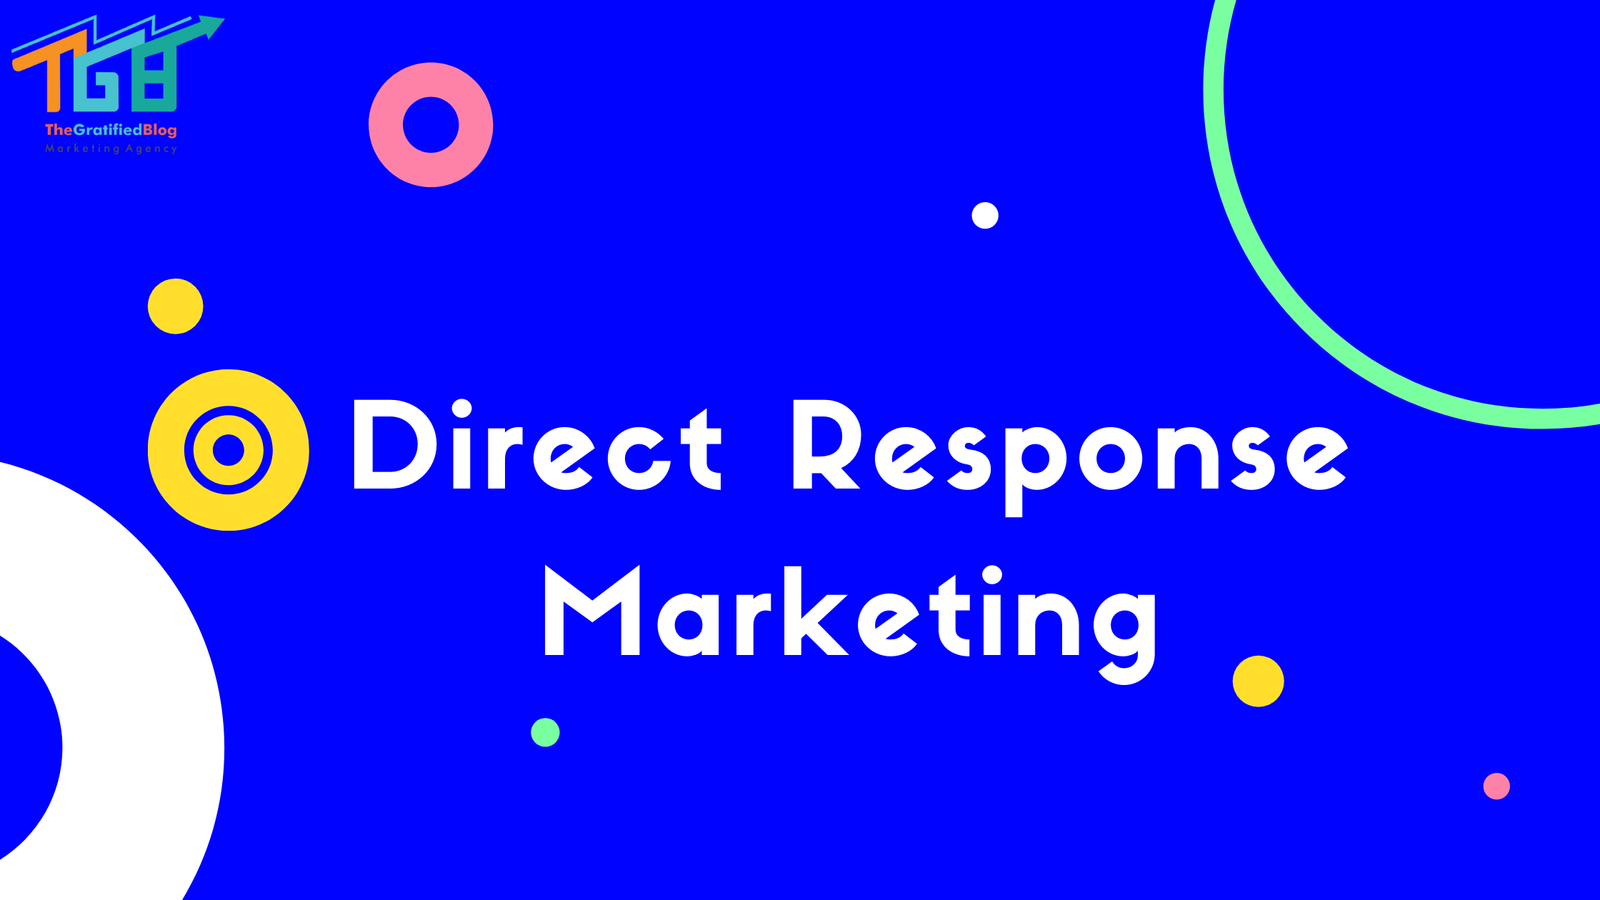 What is Direct Response Marketing